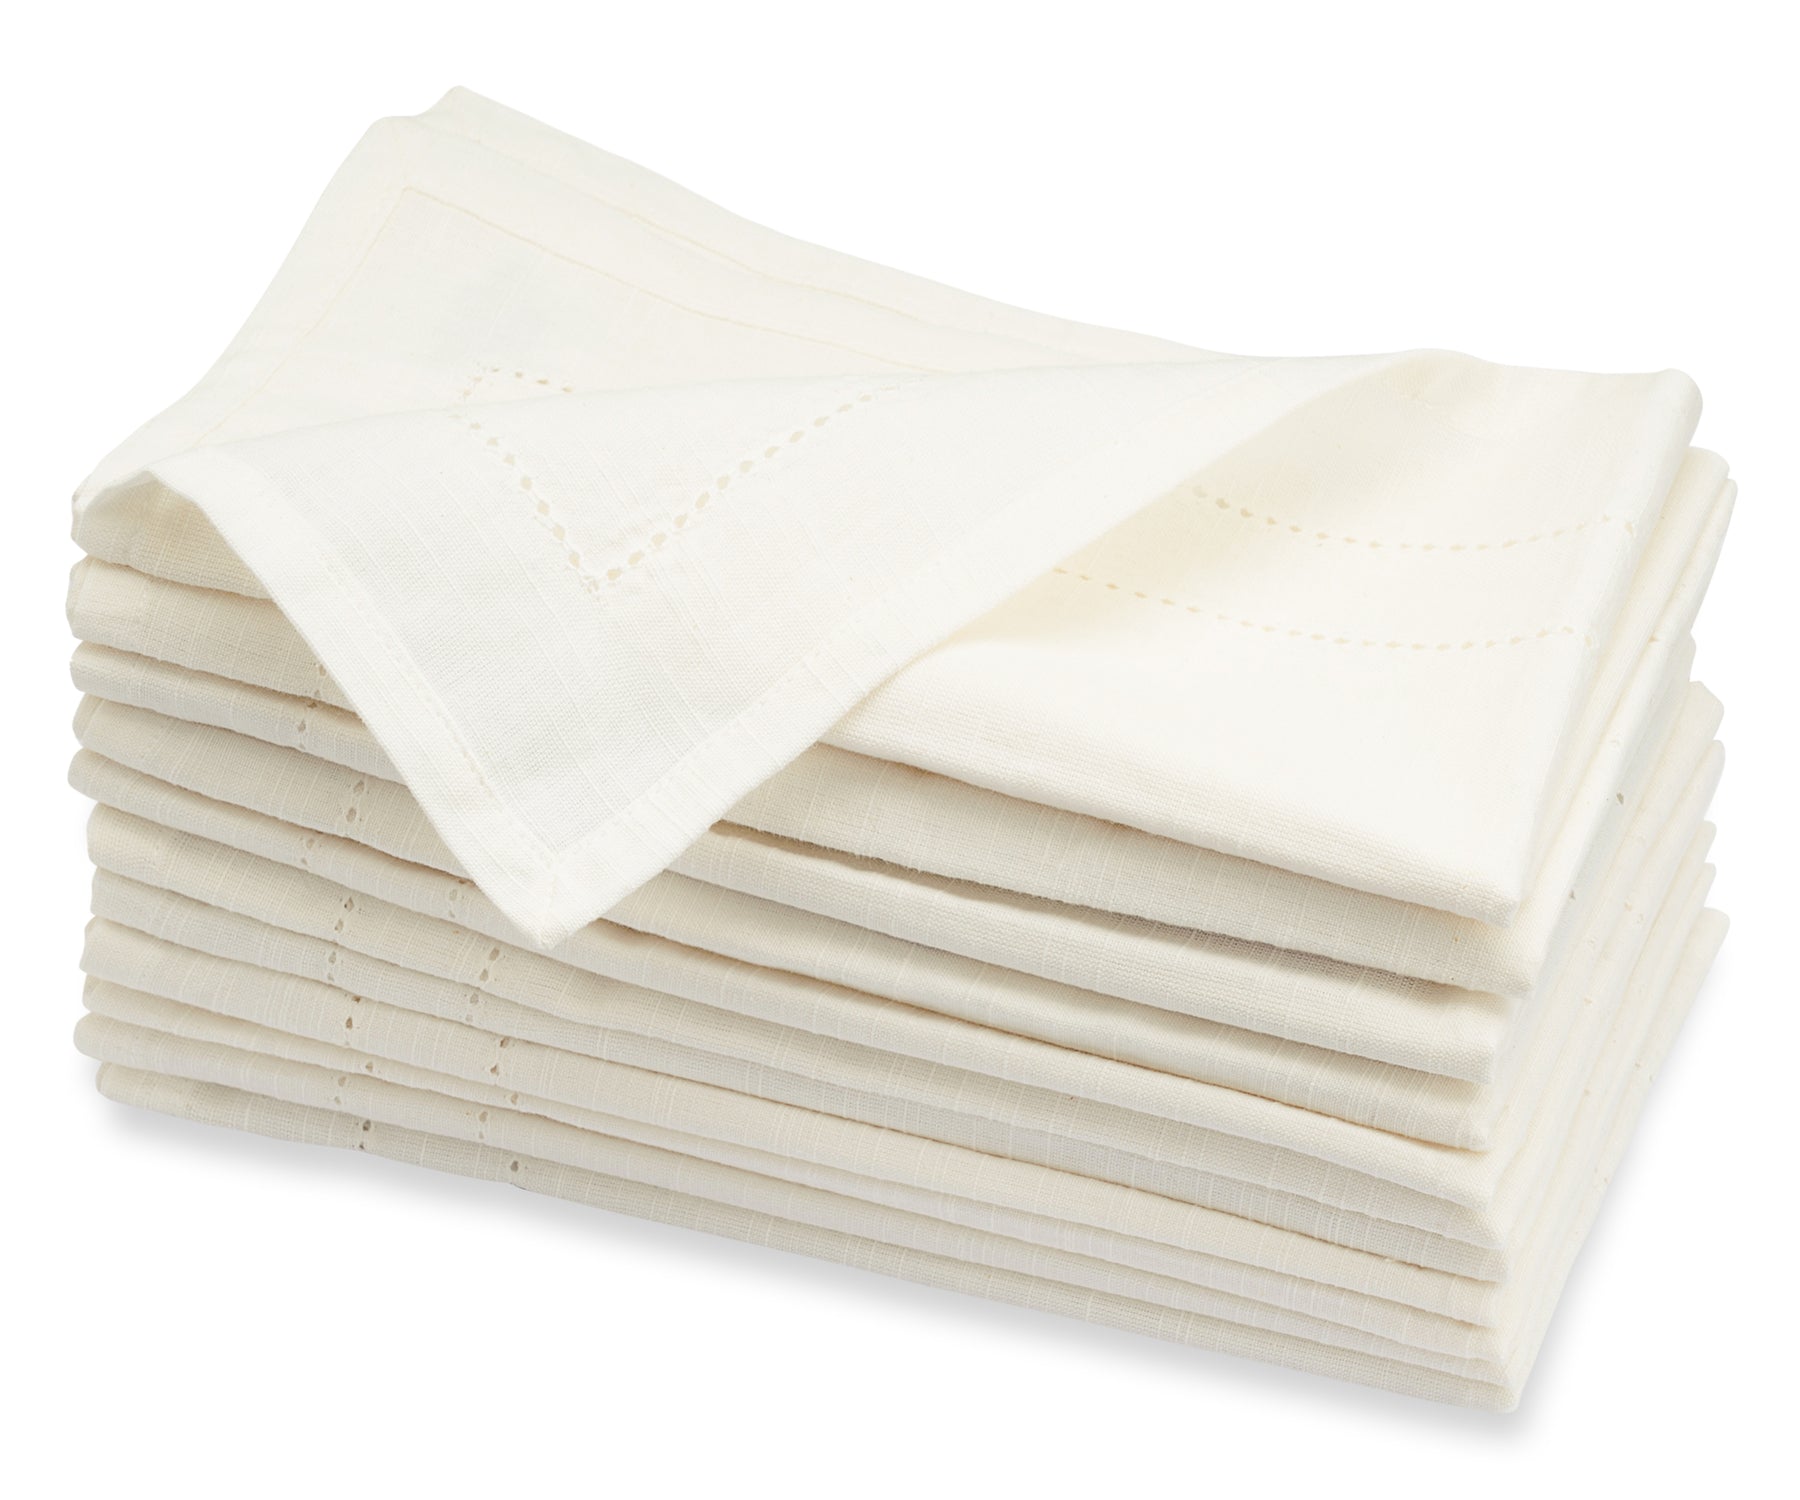 Multiple white cloth dinner napkins stacked against a pure background